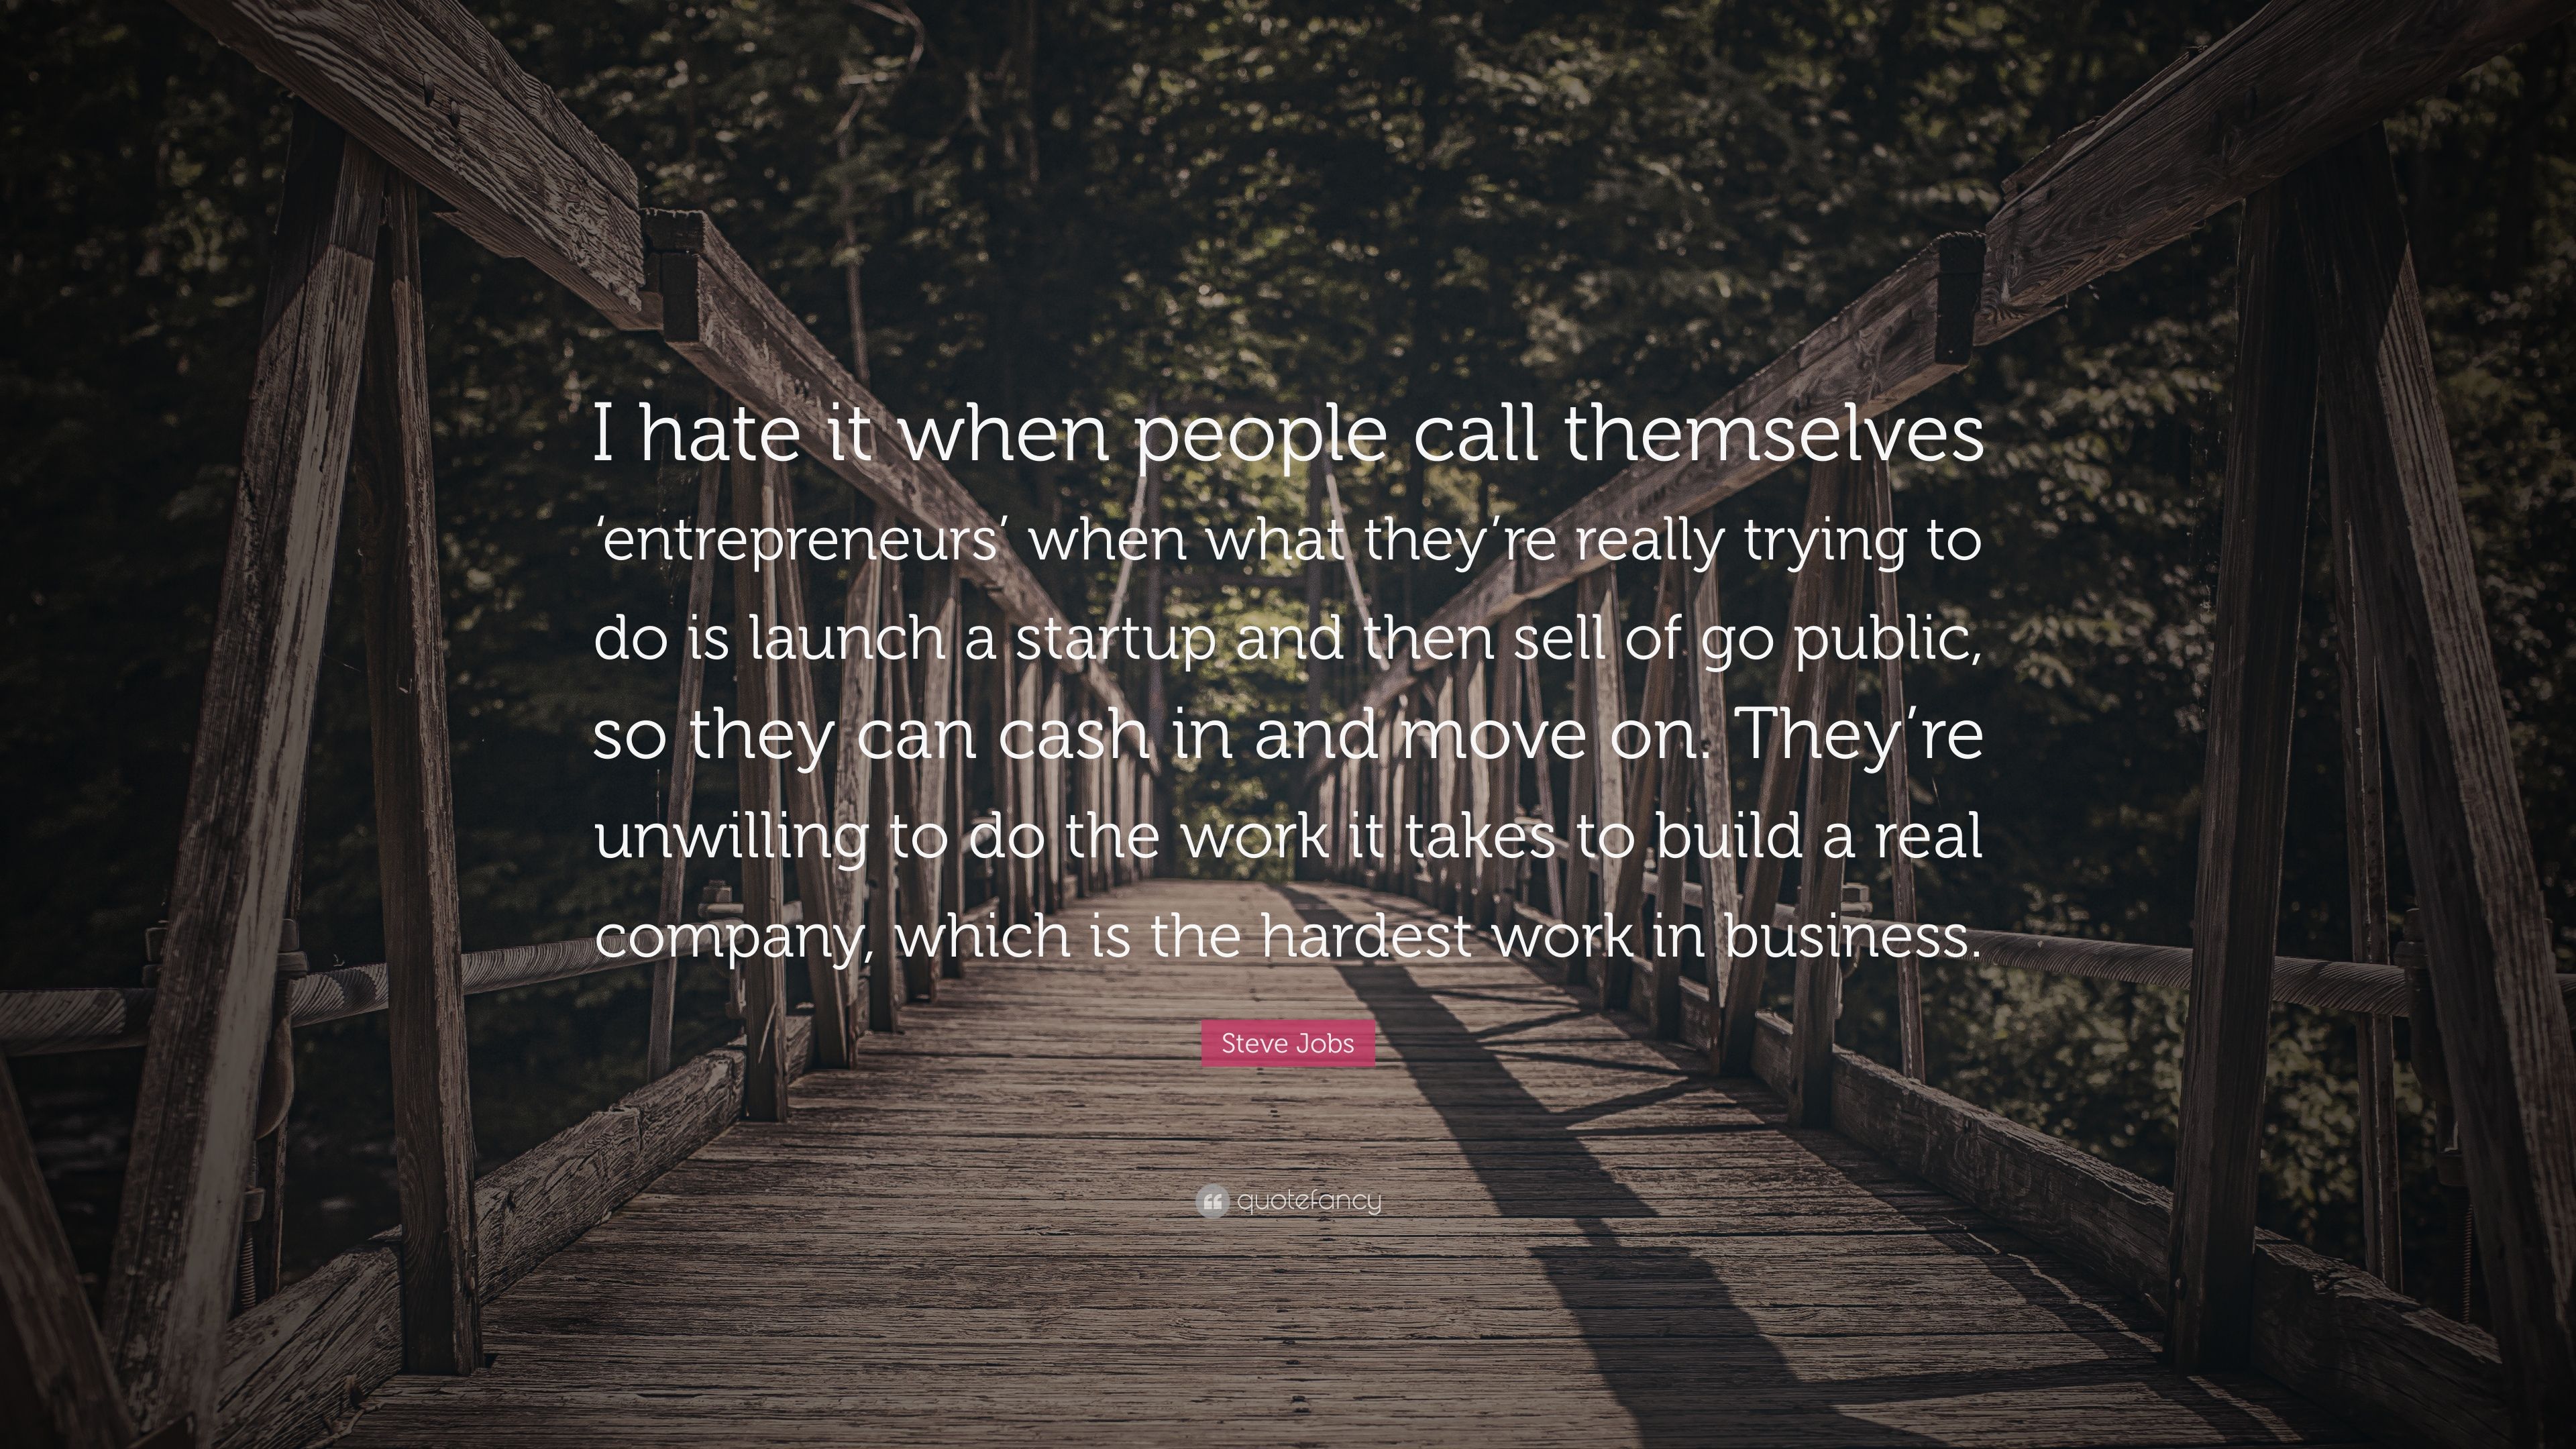 Steve Jobs Quote: “I hate it when people call themselves